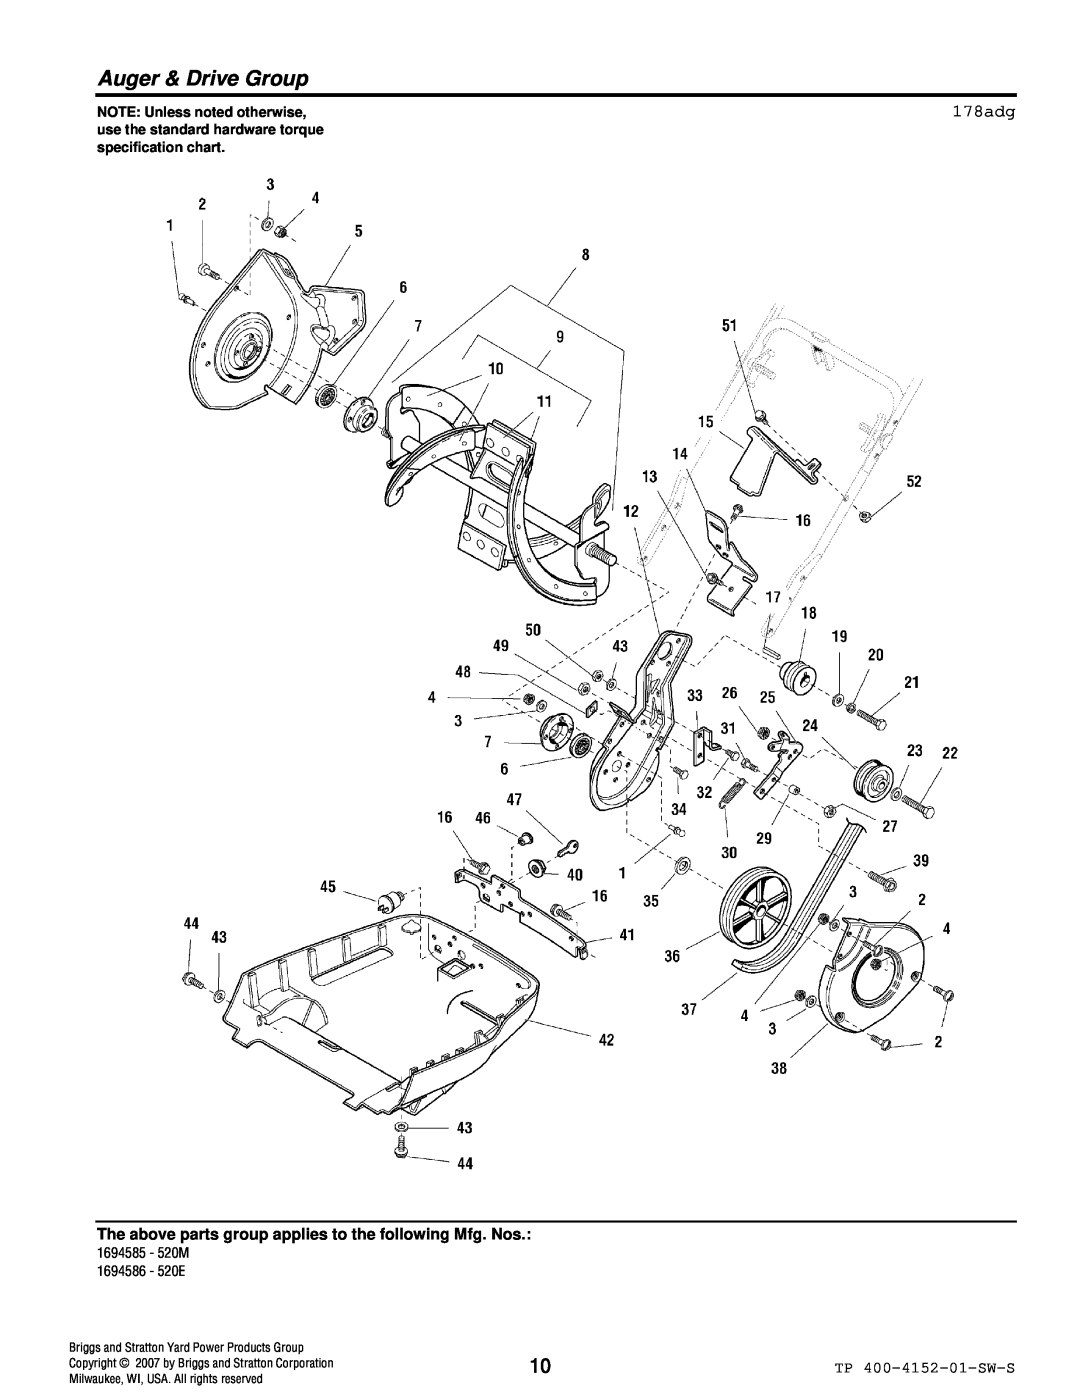 Simplicity 520 Auger & Drive Group, 178adg, NOTE: Unless noted otherwise, Briggs and Stratton Yard Power Products Group 